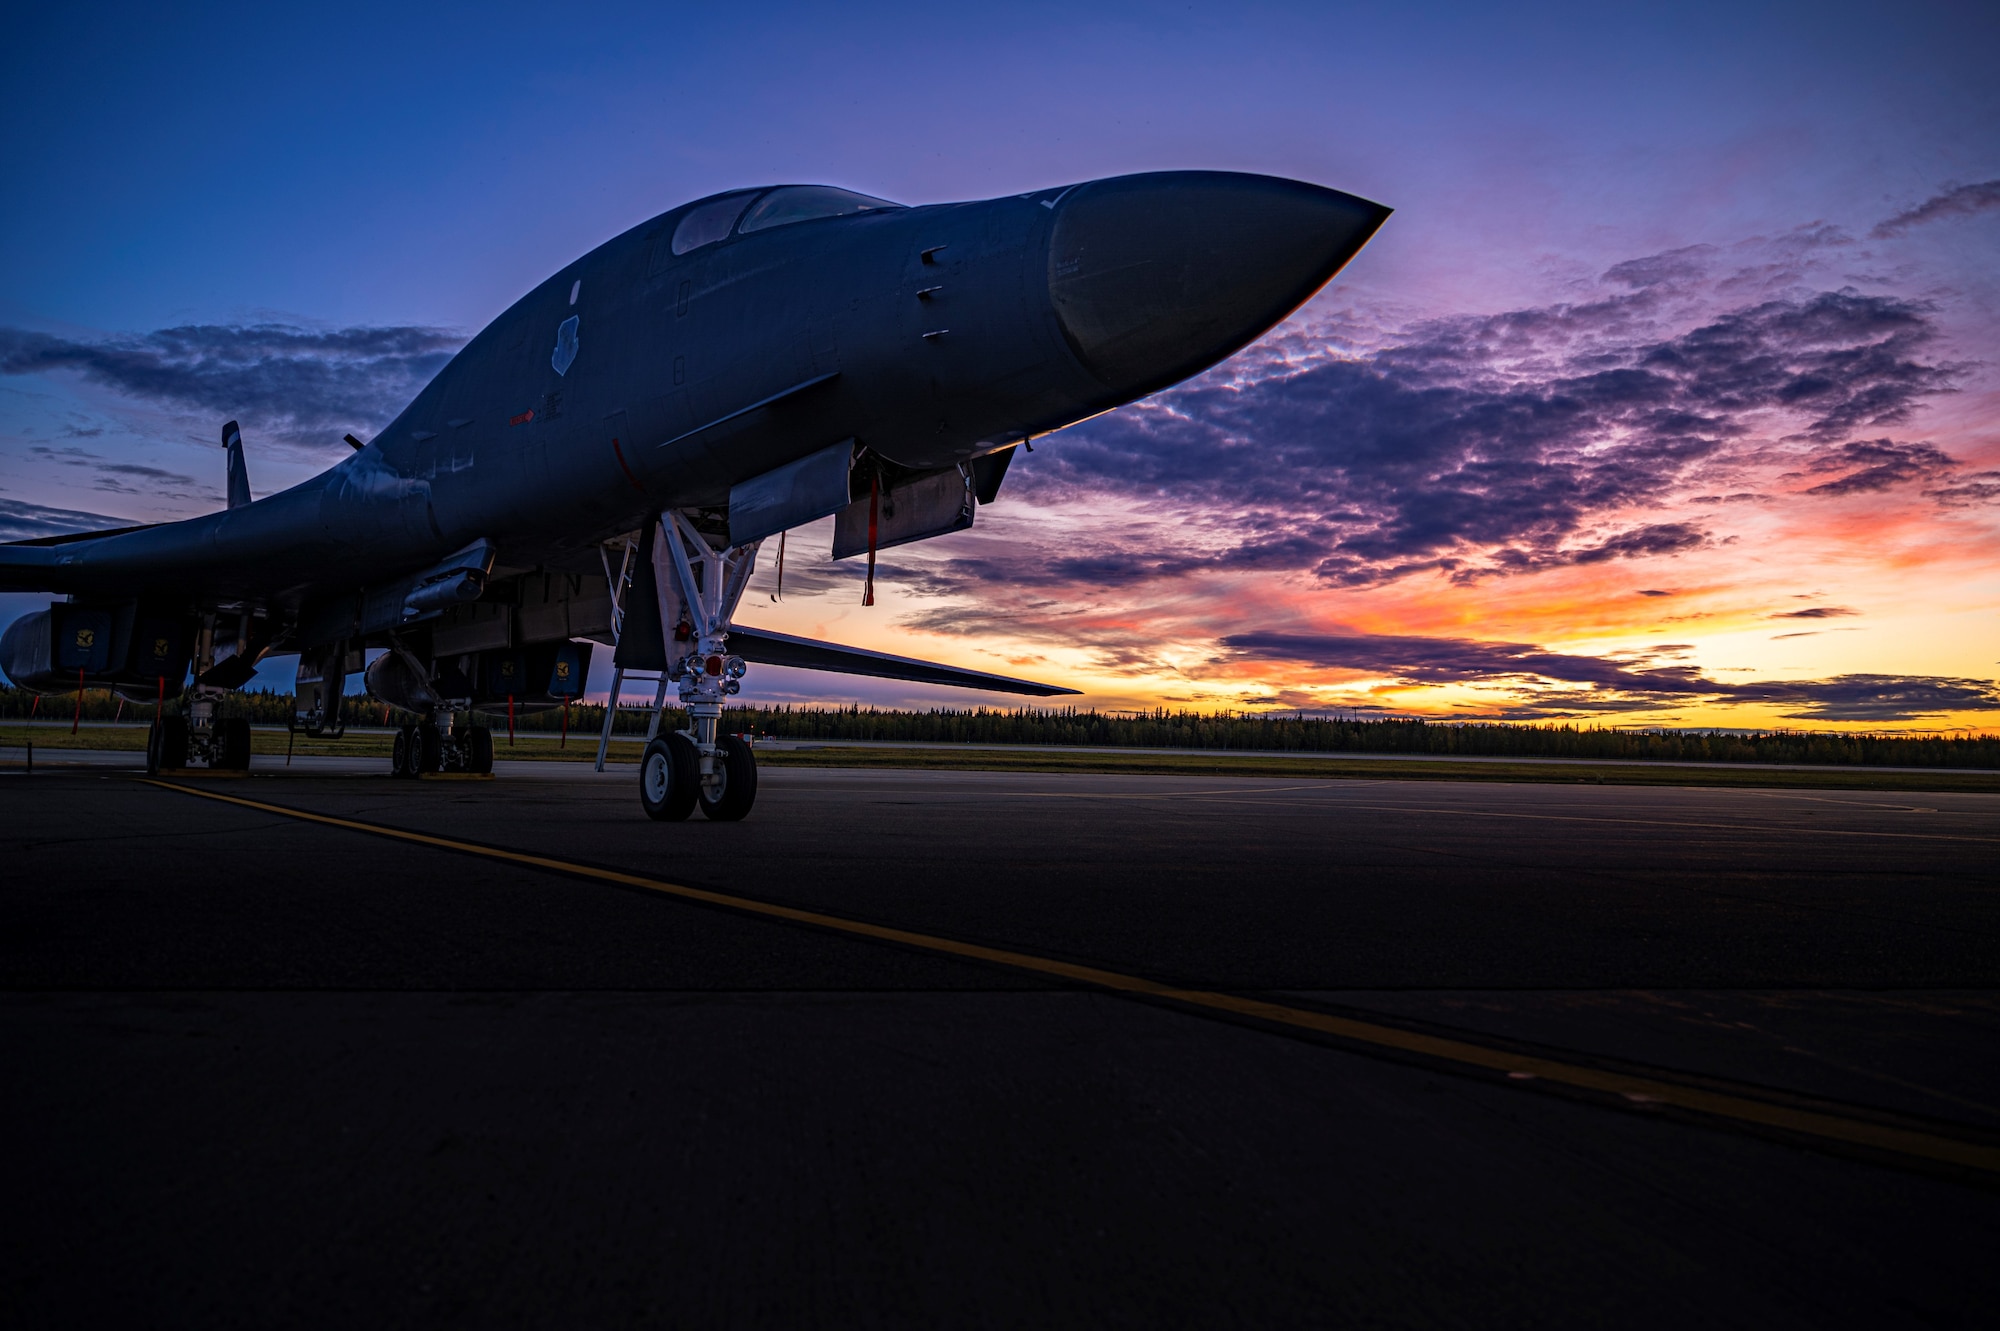 A B-1B Lancer assigned to the 7th Bomb Wing at Dyess Air Force Base, Texas, sits on the flightline at Eielson AFB, Alaska, during the Baked Alaskan exercise, Sept. 9, 2022. Two B-1’s and approximately 50 total force Airmen from the 7th BW and 307th BW engaged in the Agile Combat Employment exercise to refine multiple skills in under 24 hours. (U.S. Air Force photo by Senior Airman Colin Hollowell)